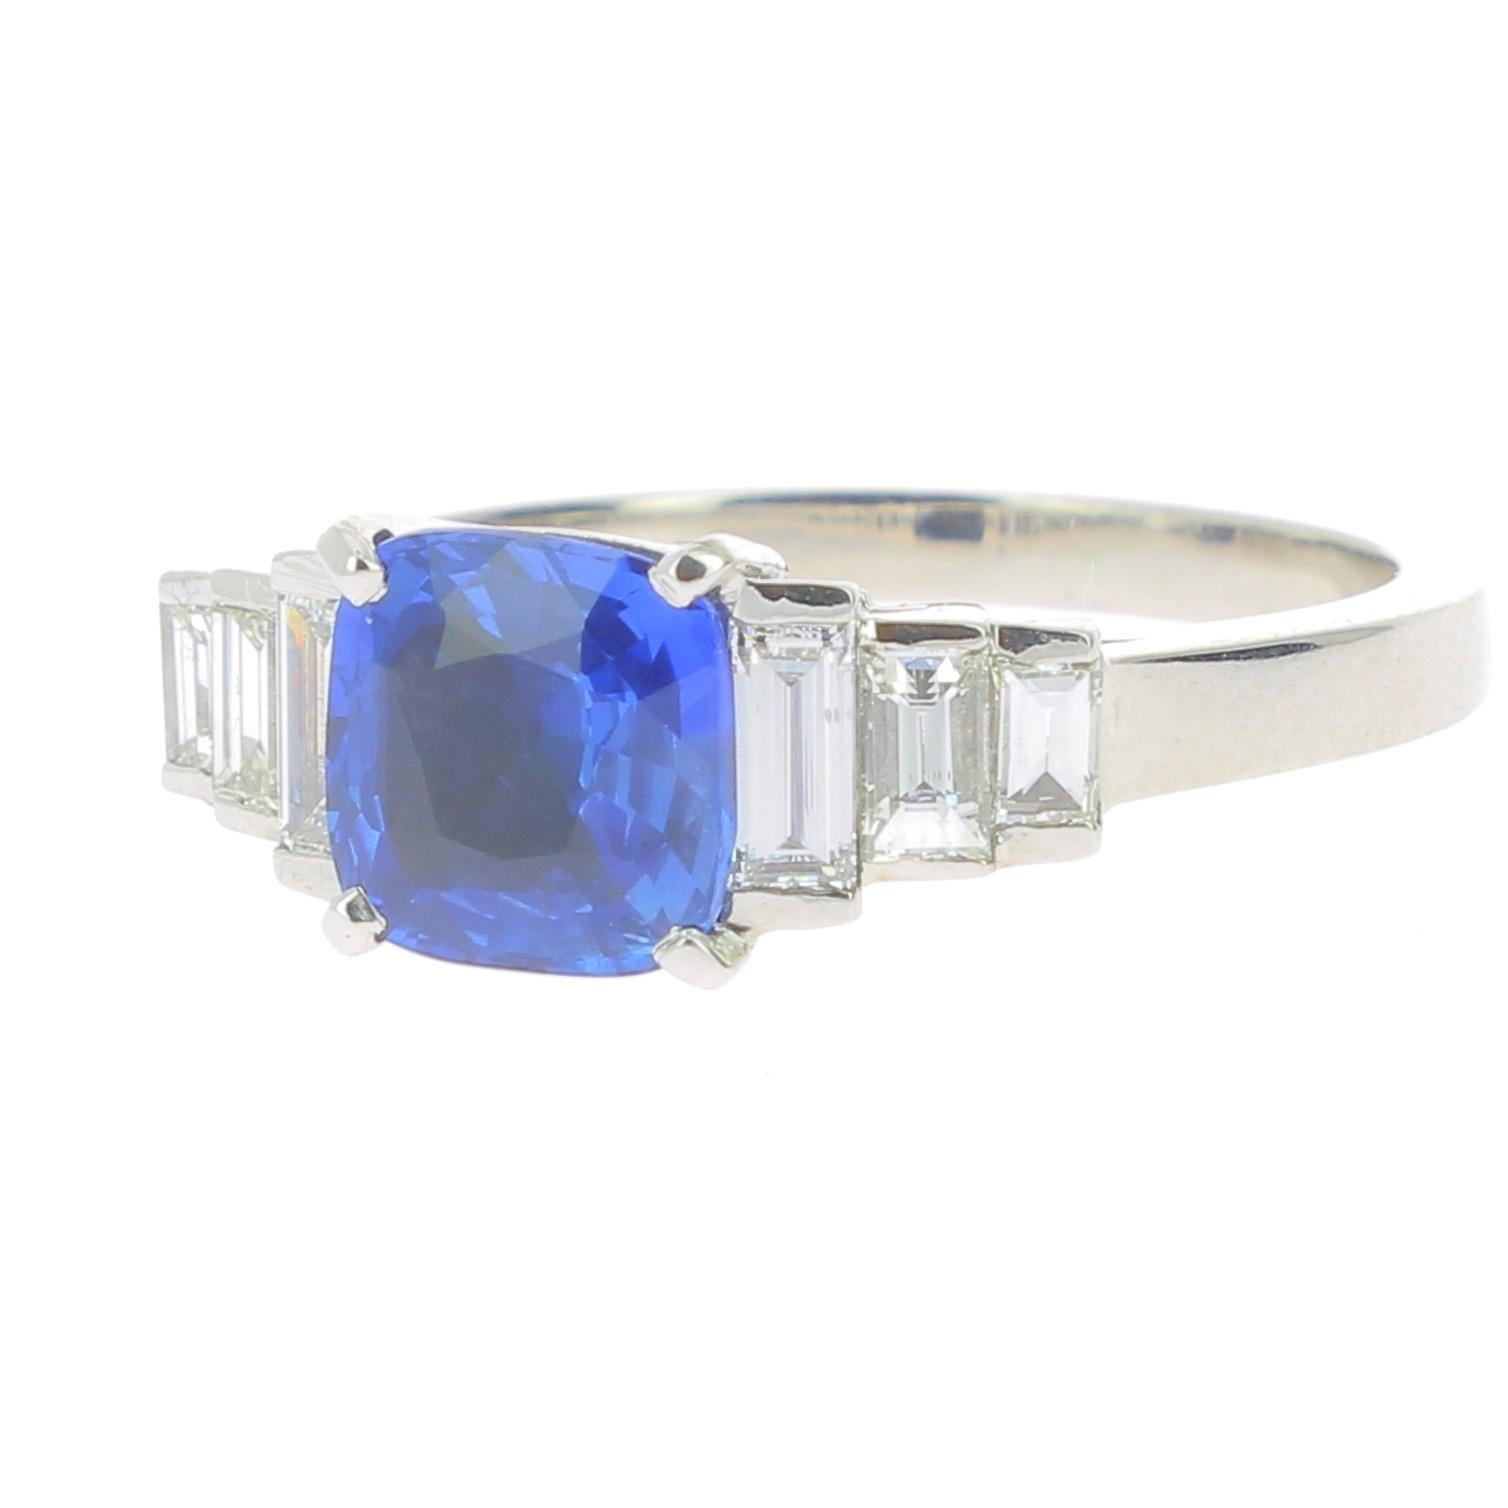 An amazing Blue Sapphire ring set with 18K White Gold and 6 Baguette Diamonds.
The Sapphire is certified as an 